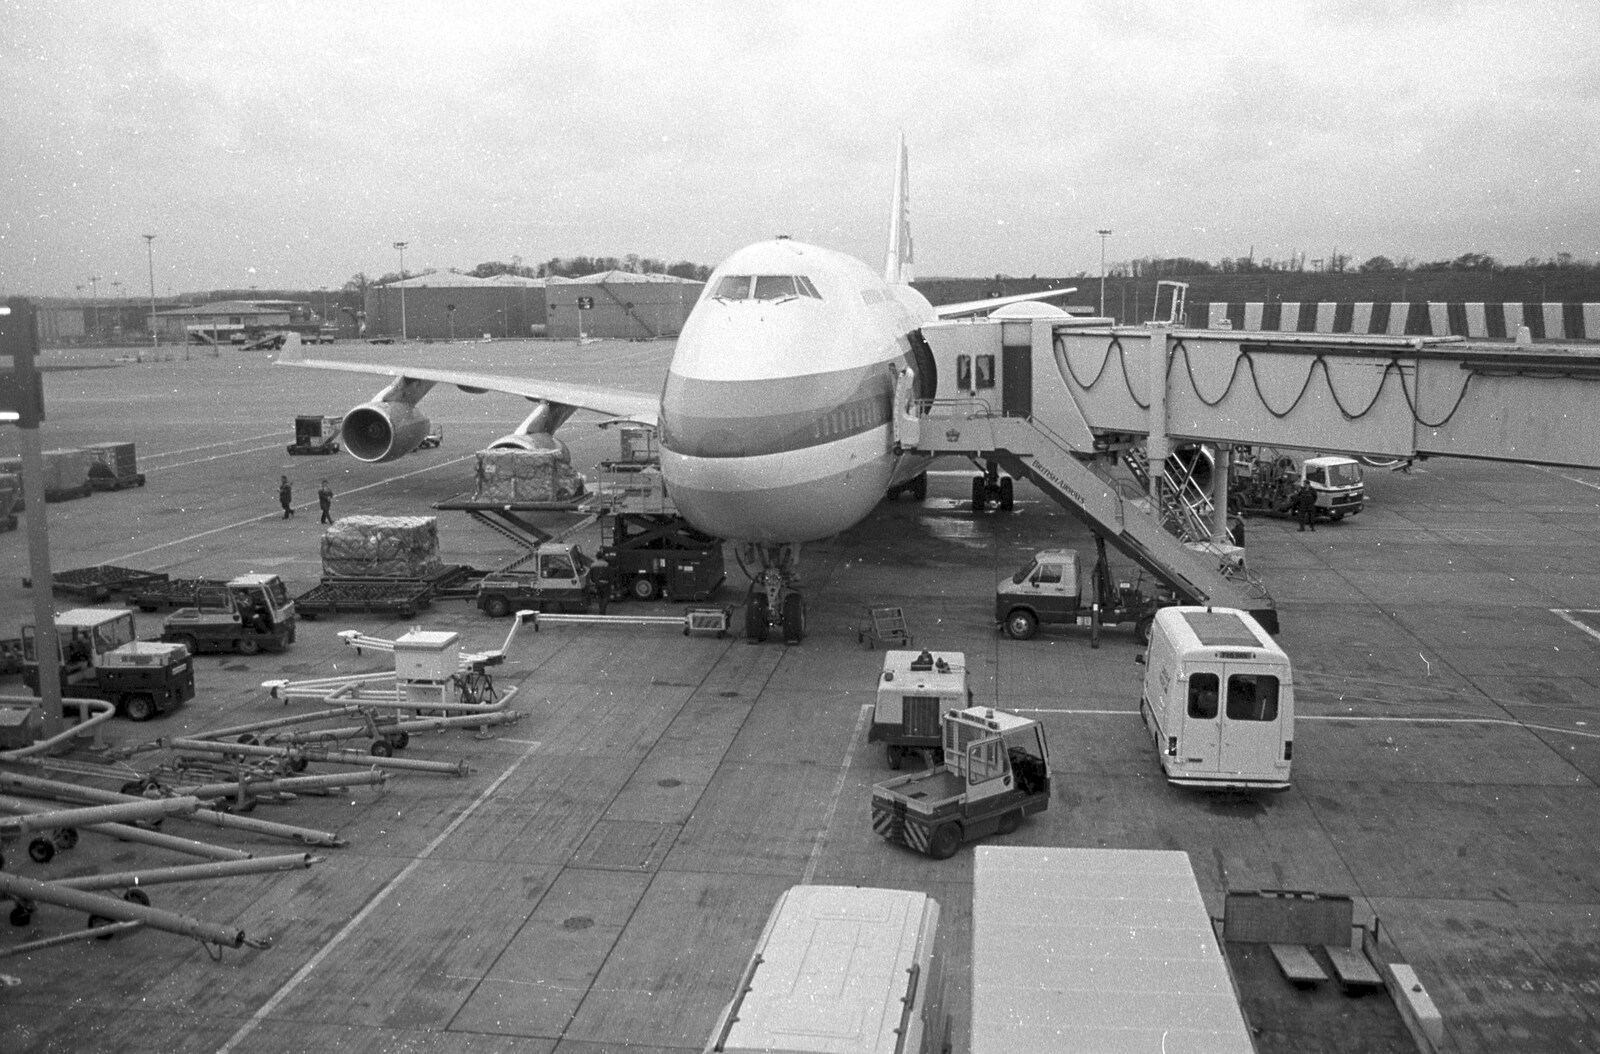 Our Air New Zealand 747 at Honolulu airport from A 747 Cockpit, Honolulu and Pearl Harbor, O'ahu, Hawai'i, United States - 20th November 1992